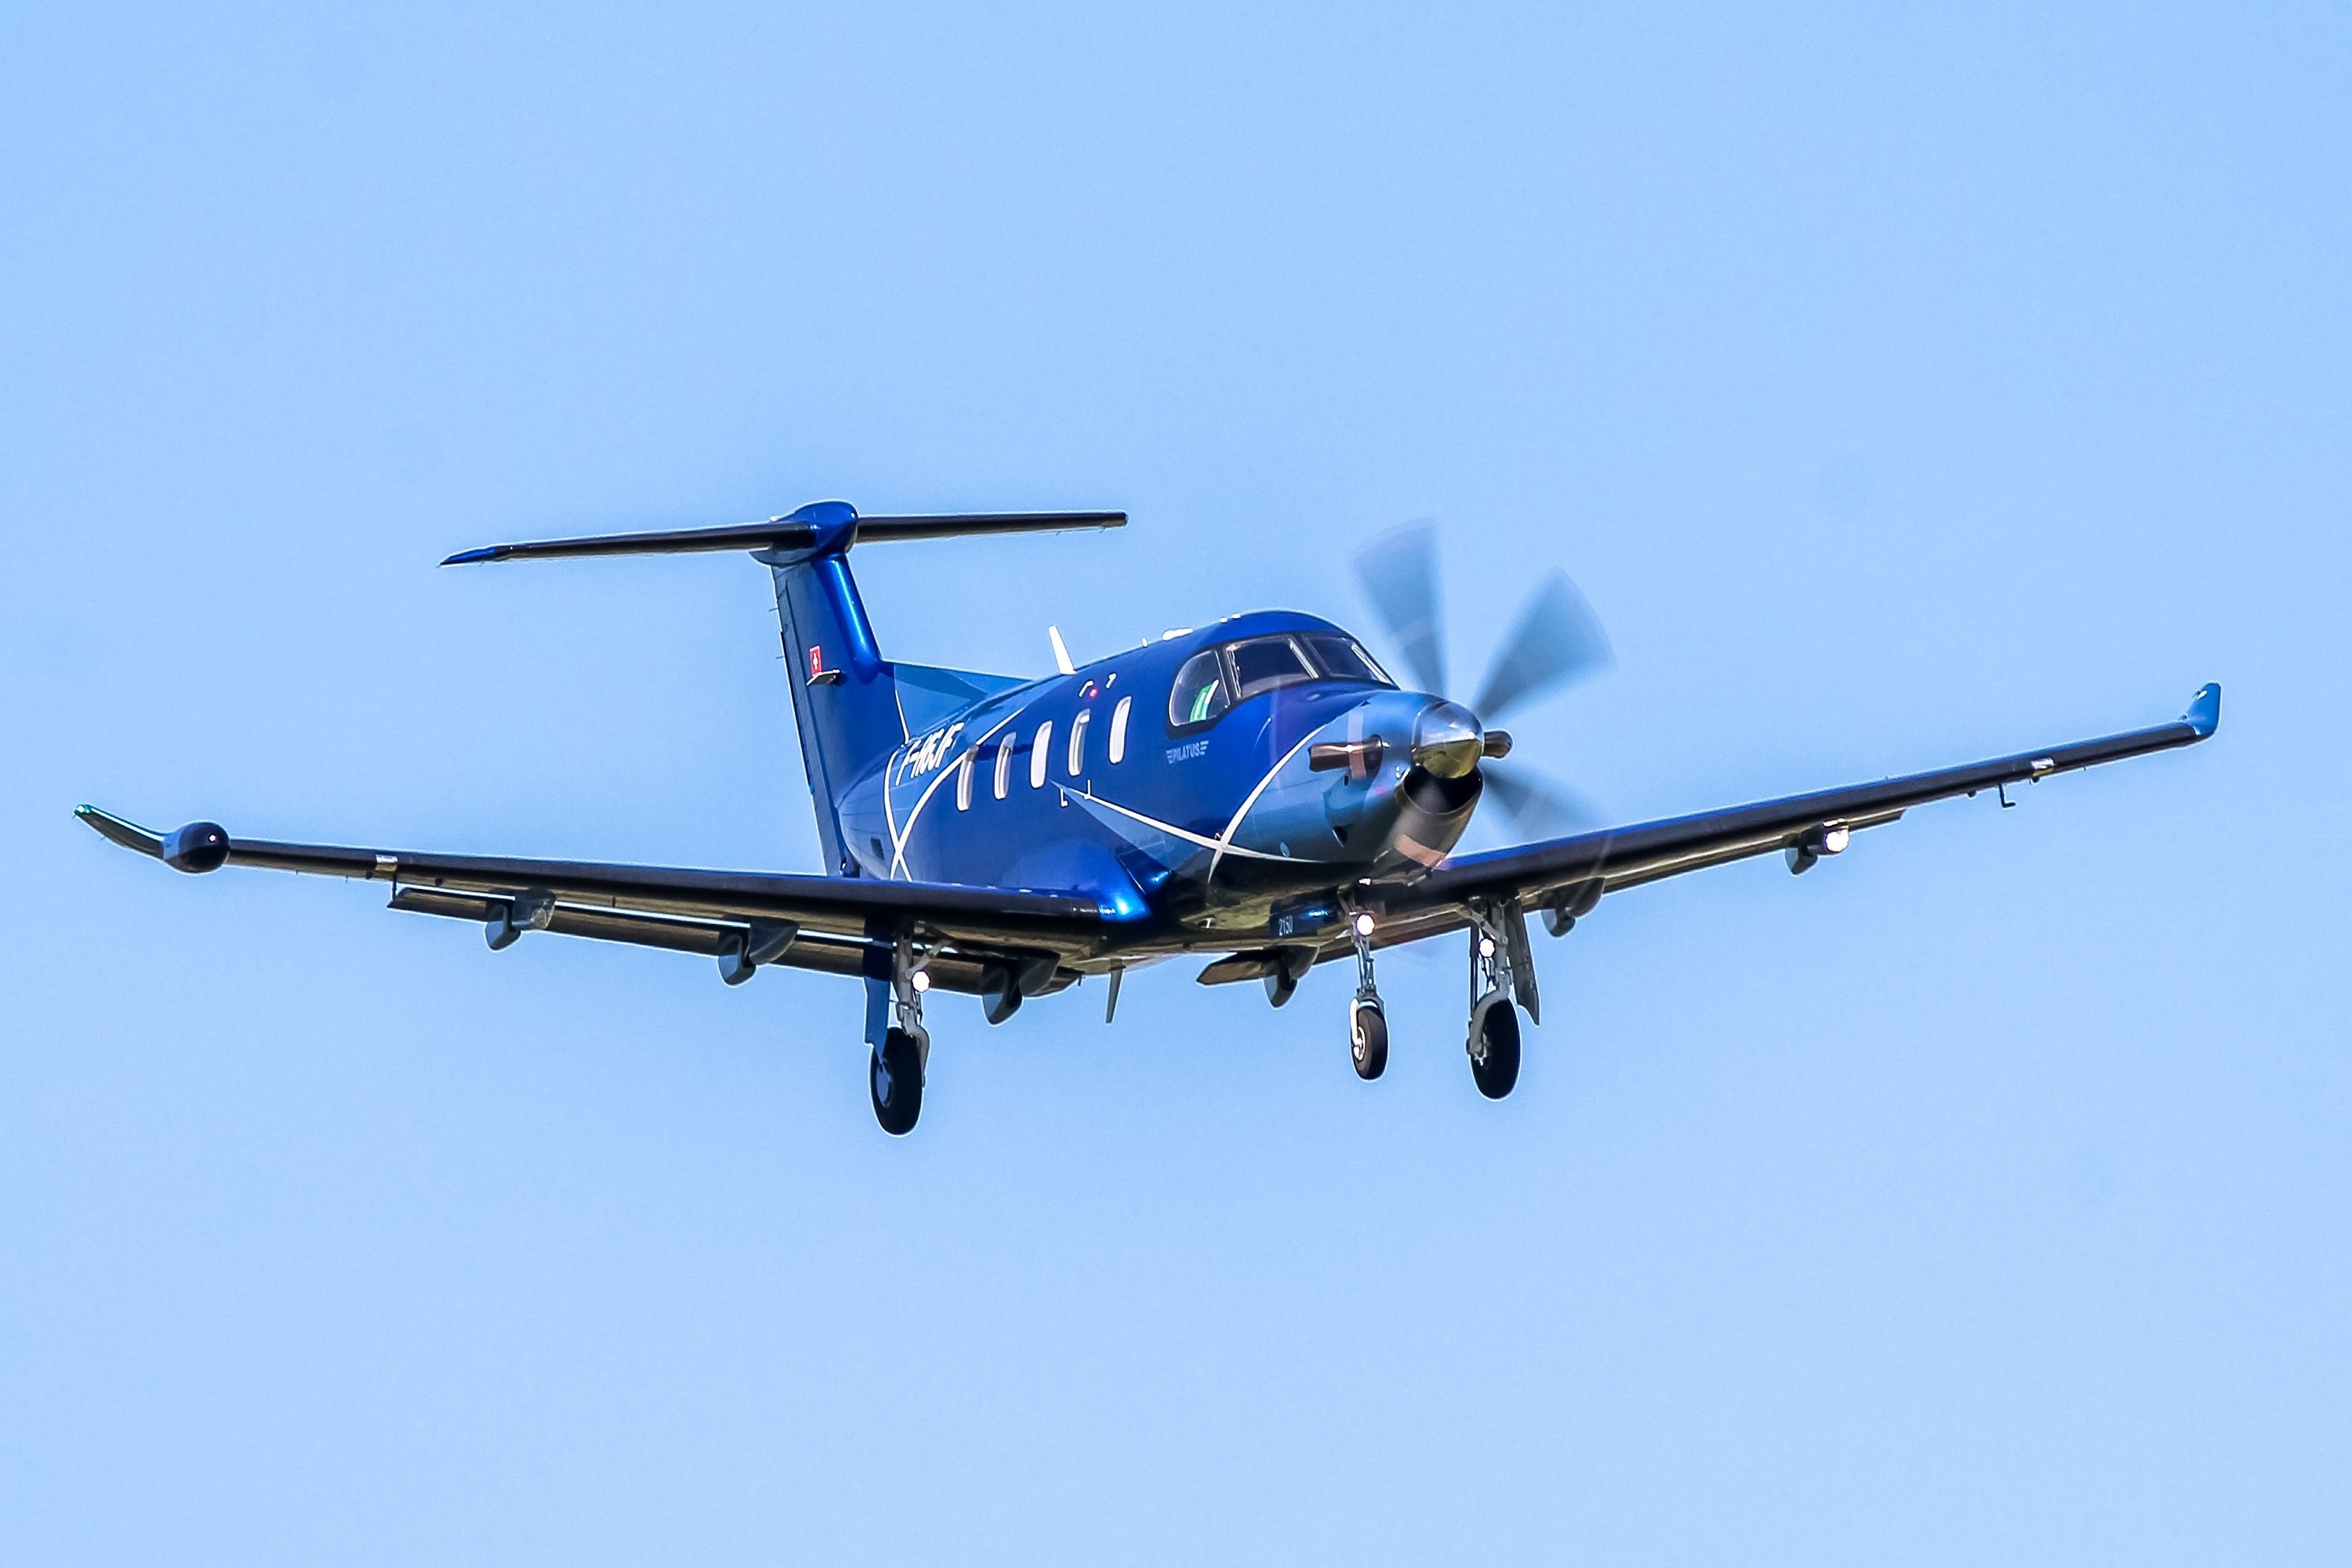 A Pilatus PC-12 flying in the sky.